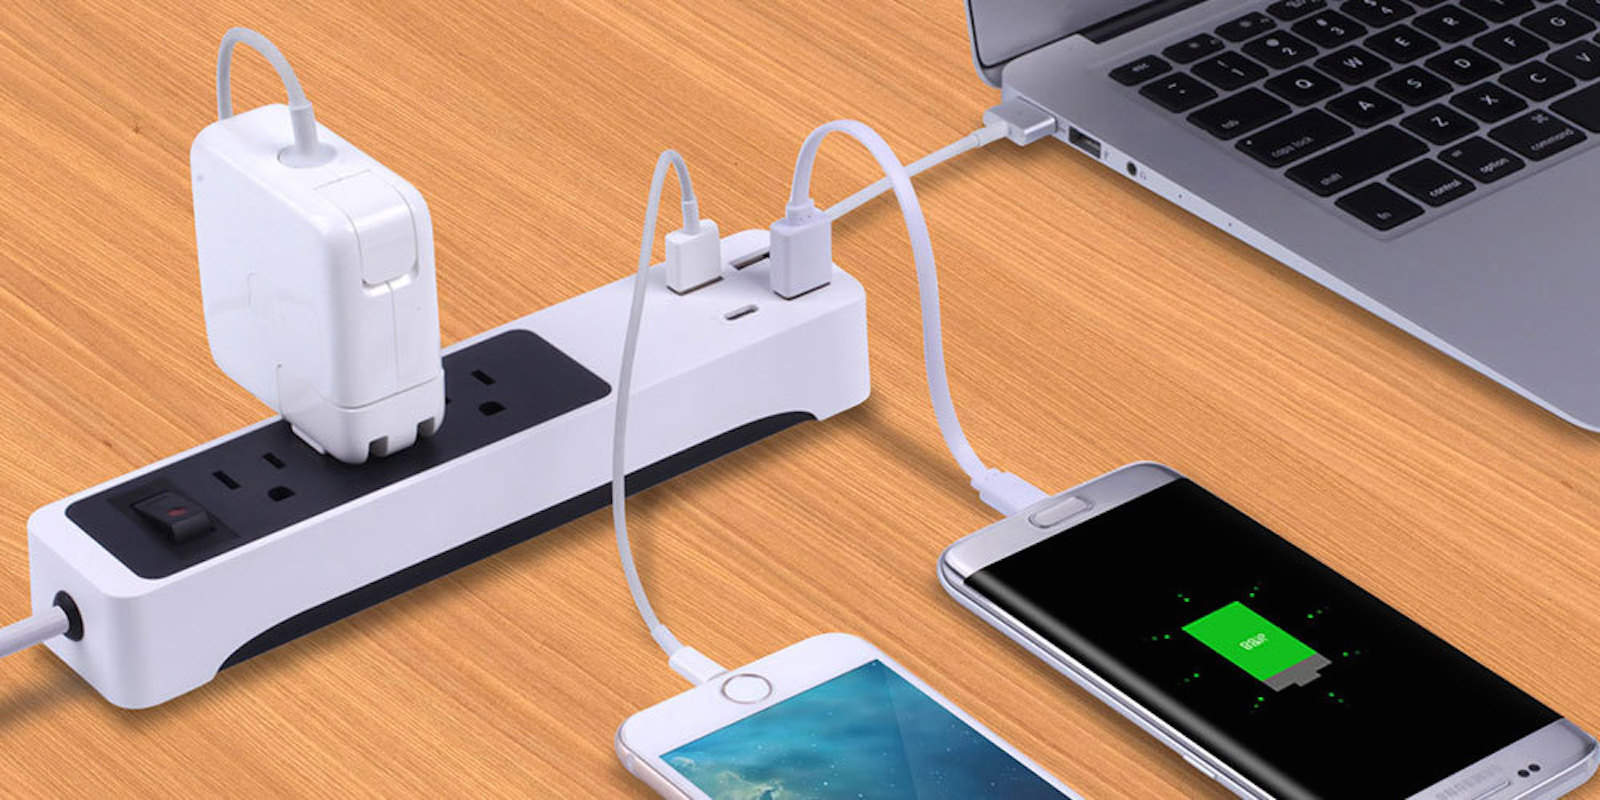 Kinkoo designed a power strip for today's needs, with three standard USB and a USB-C port built right in.